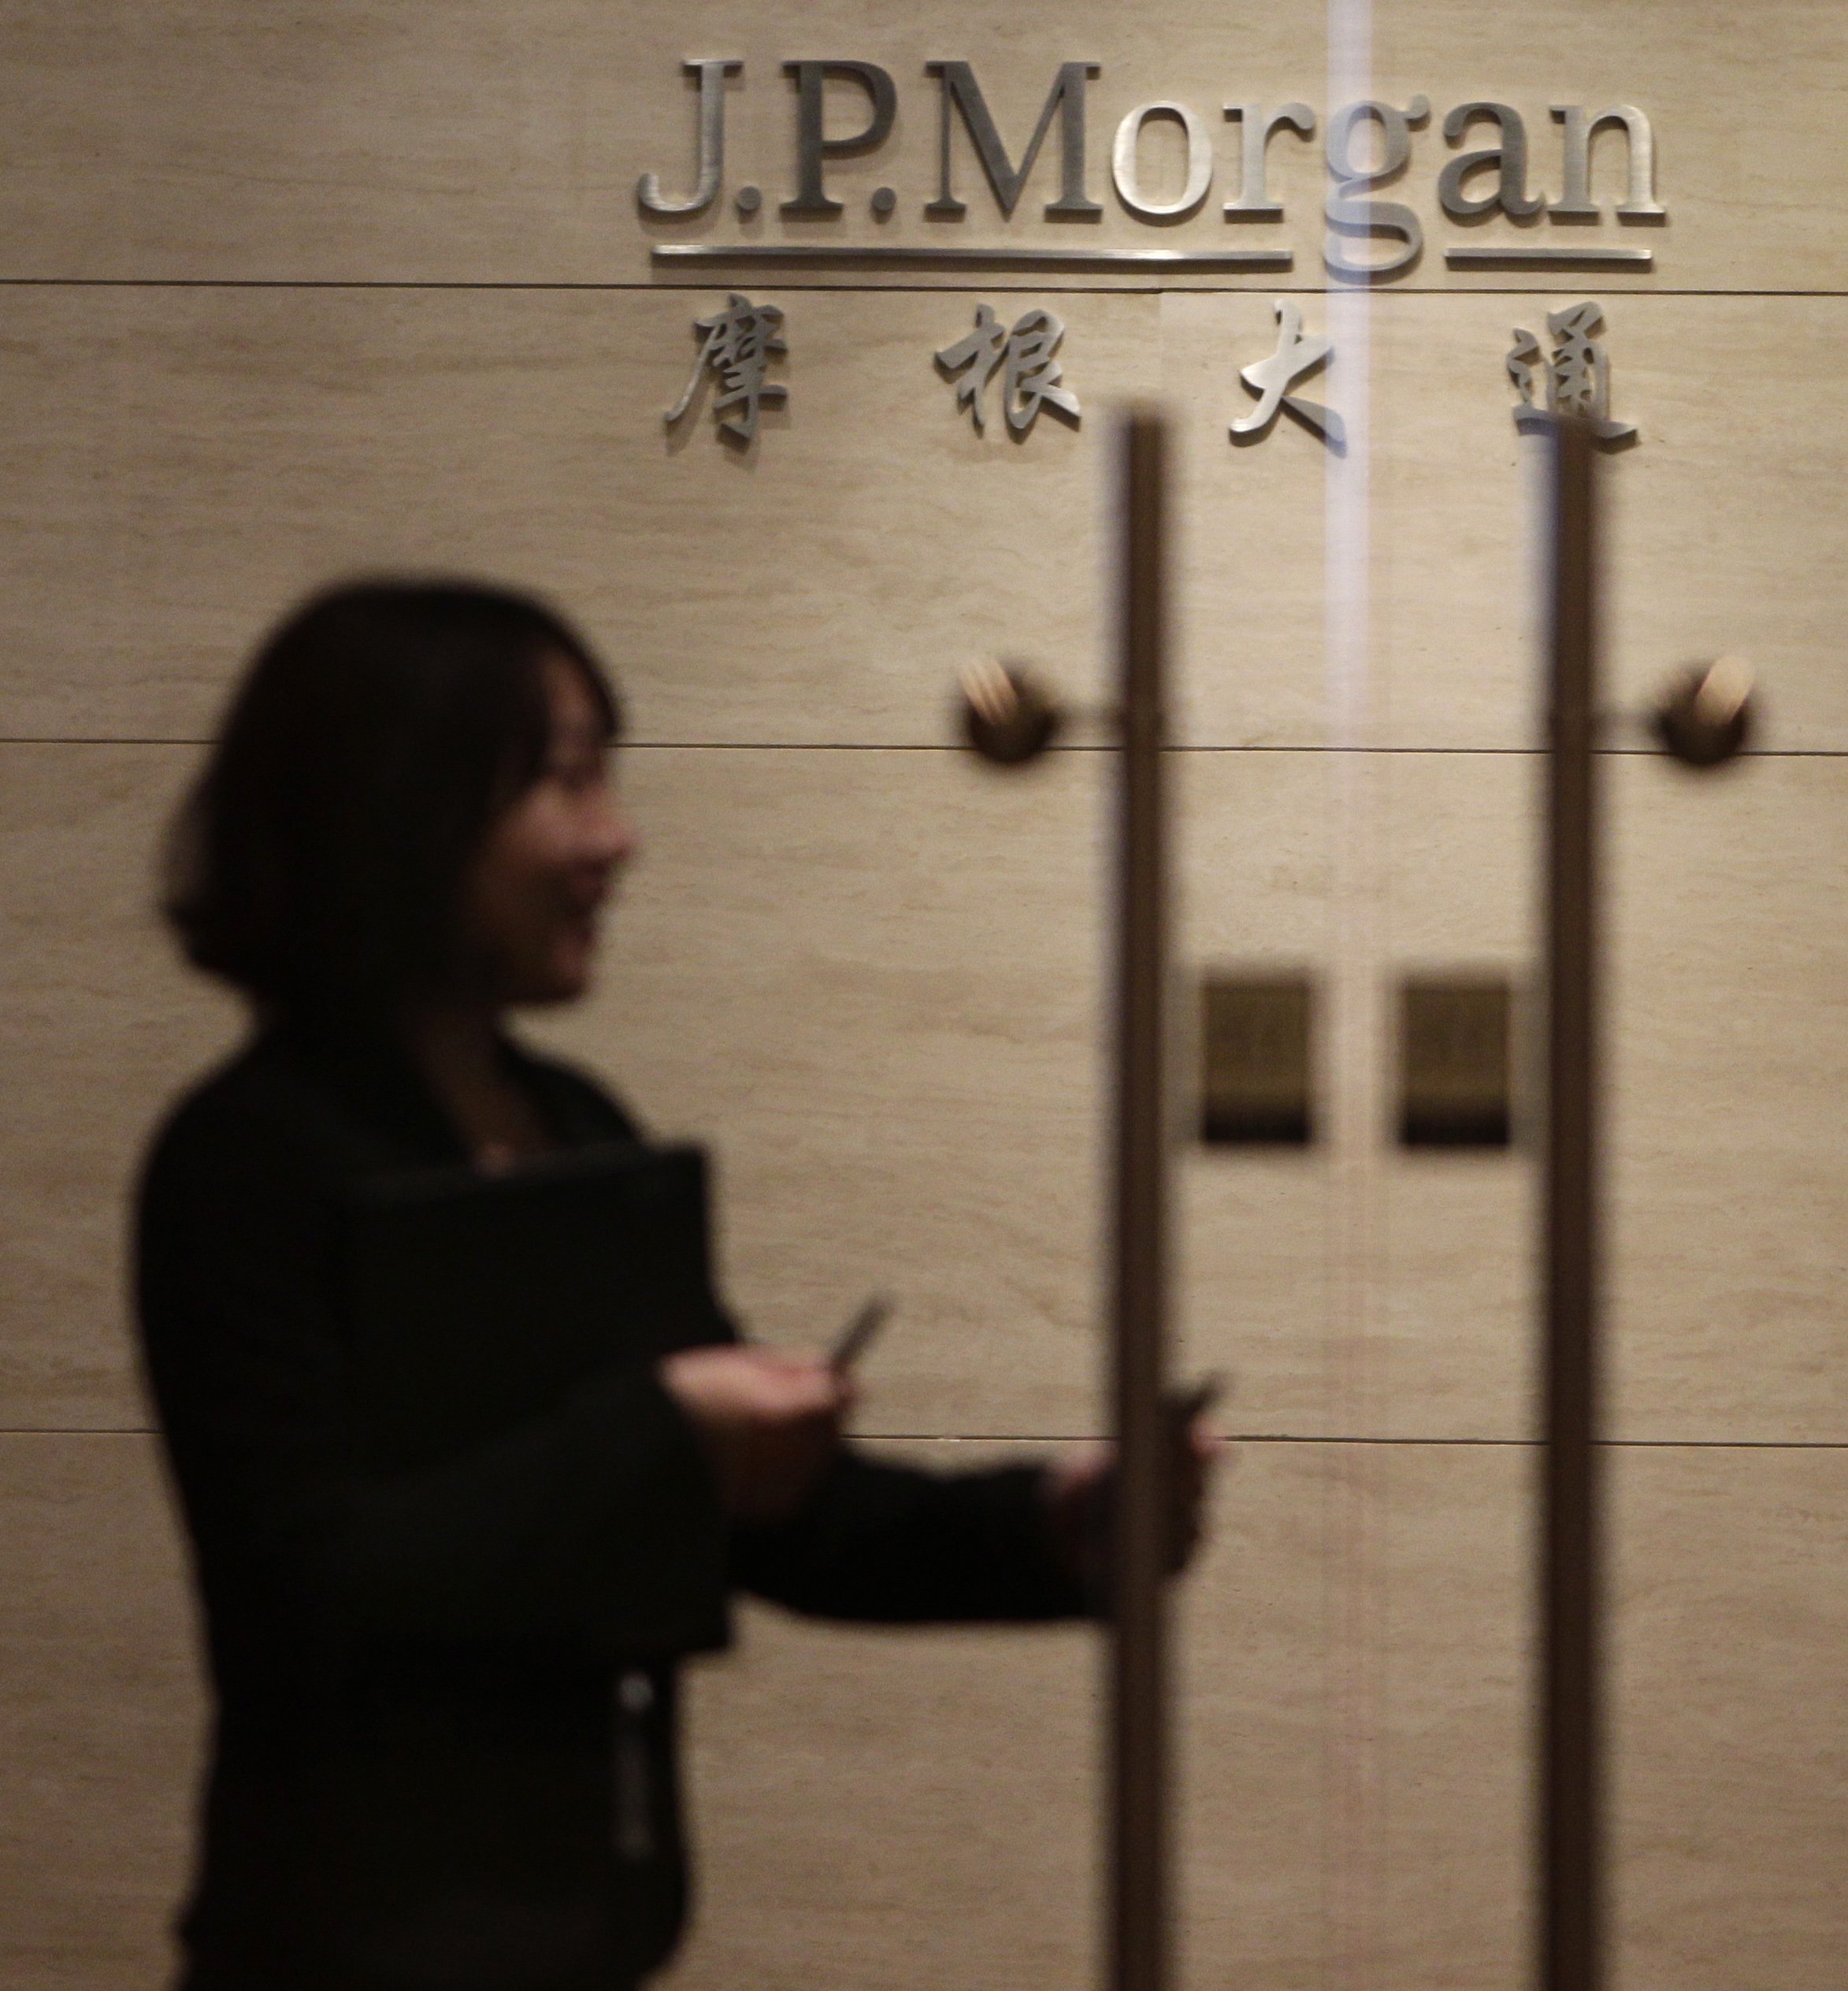 JPMorgan's hiring practices in Hong Kong and the mainland have come under regulators' scrutiny. Photo: Reuters